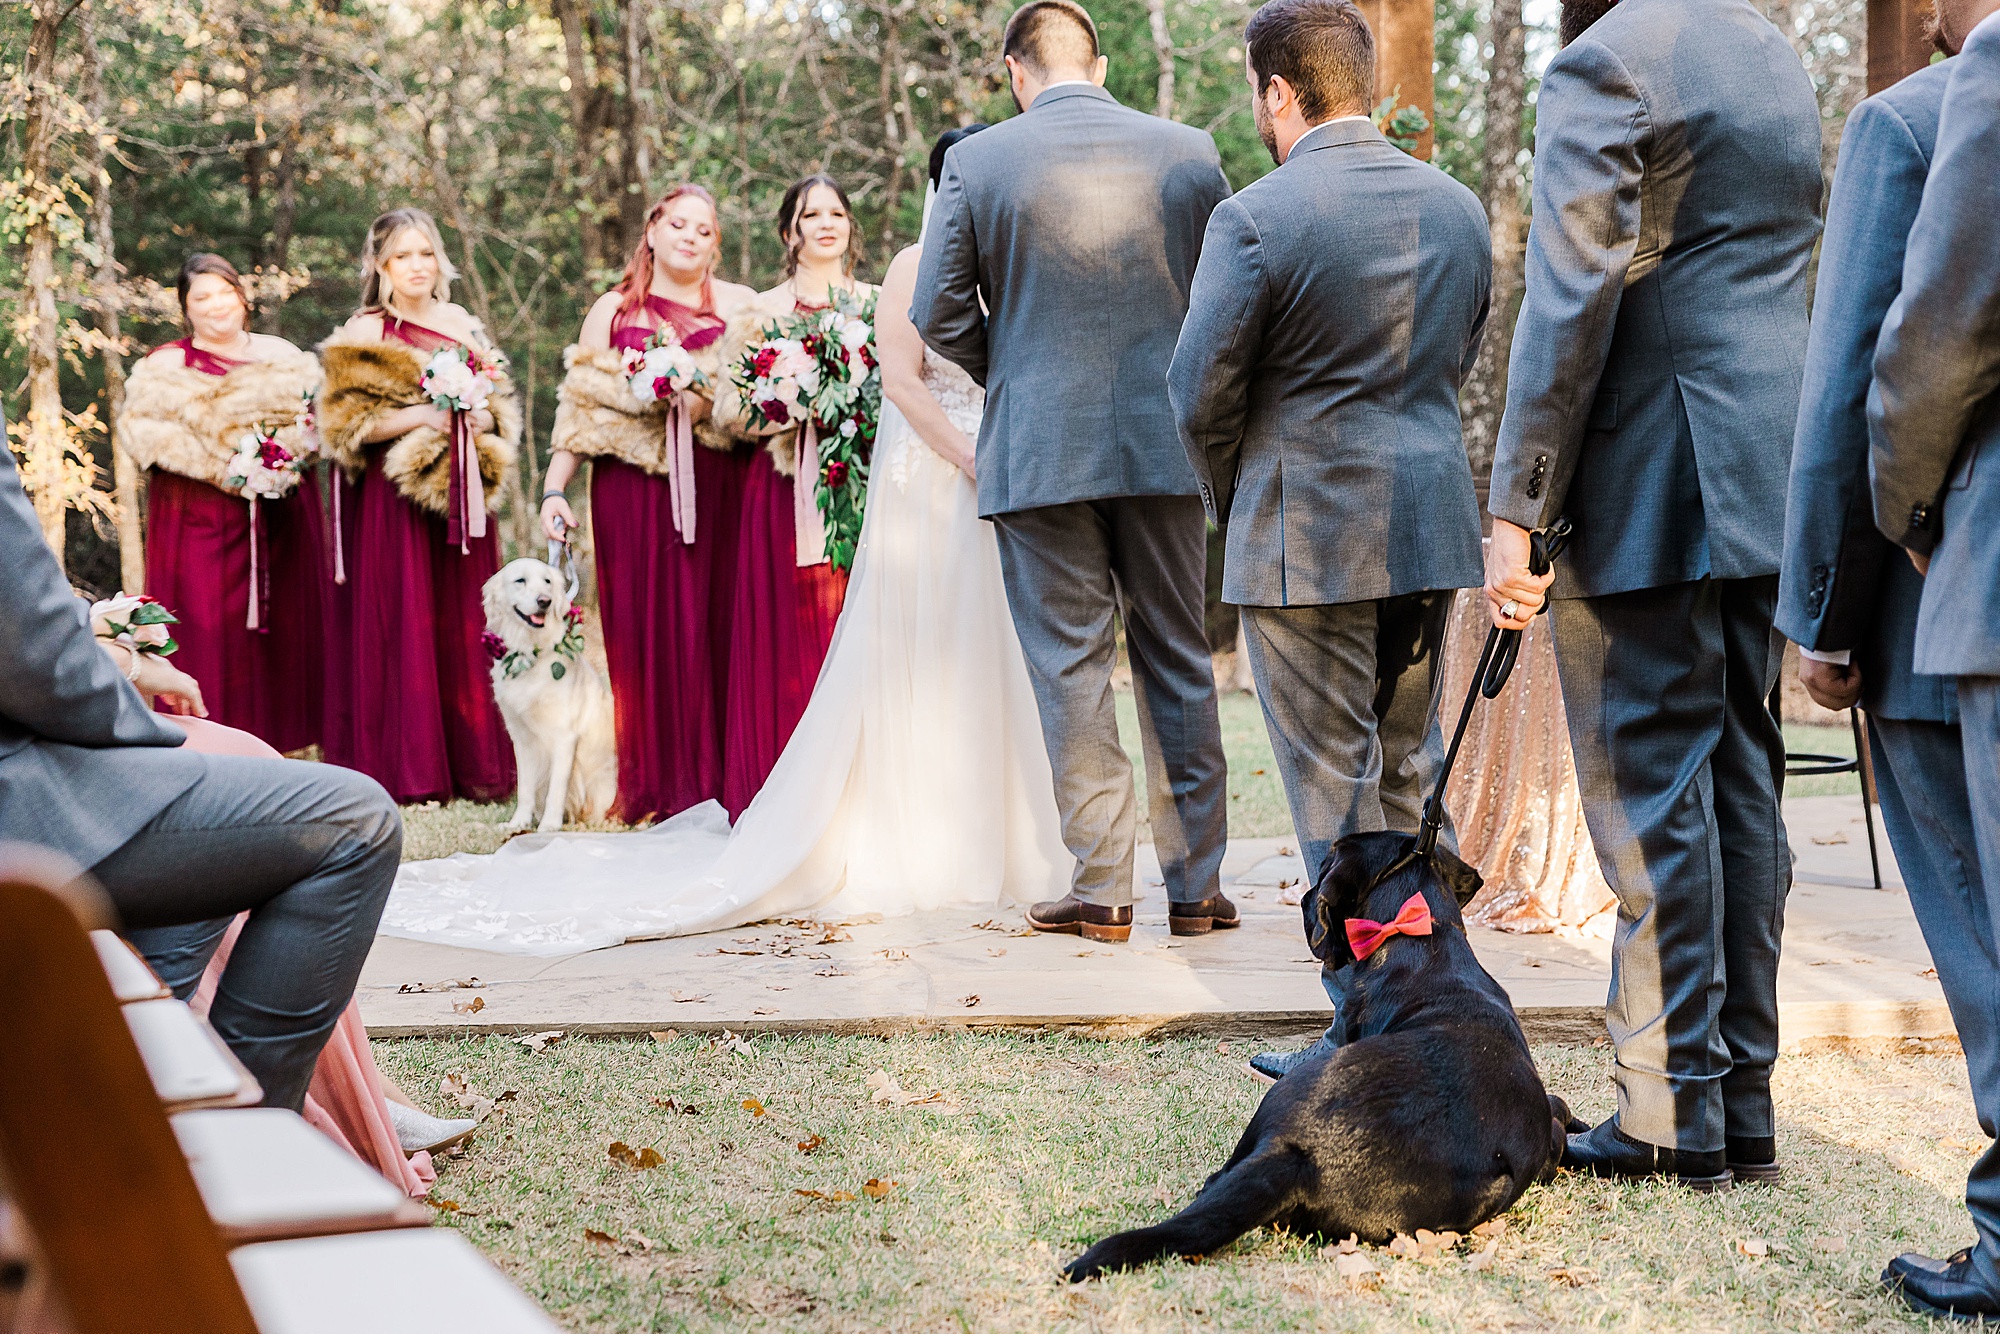 newlyweds exchange vows during outdoor wedding ceremony in North Texas while dogs watch